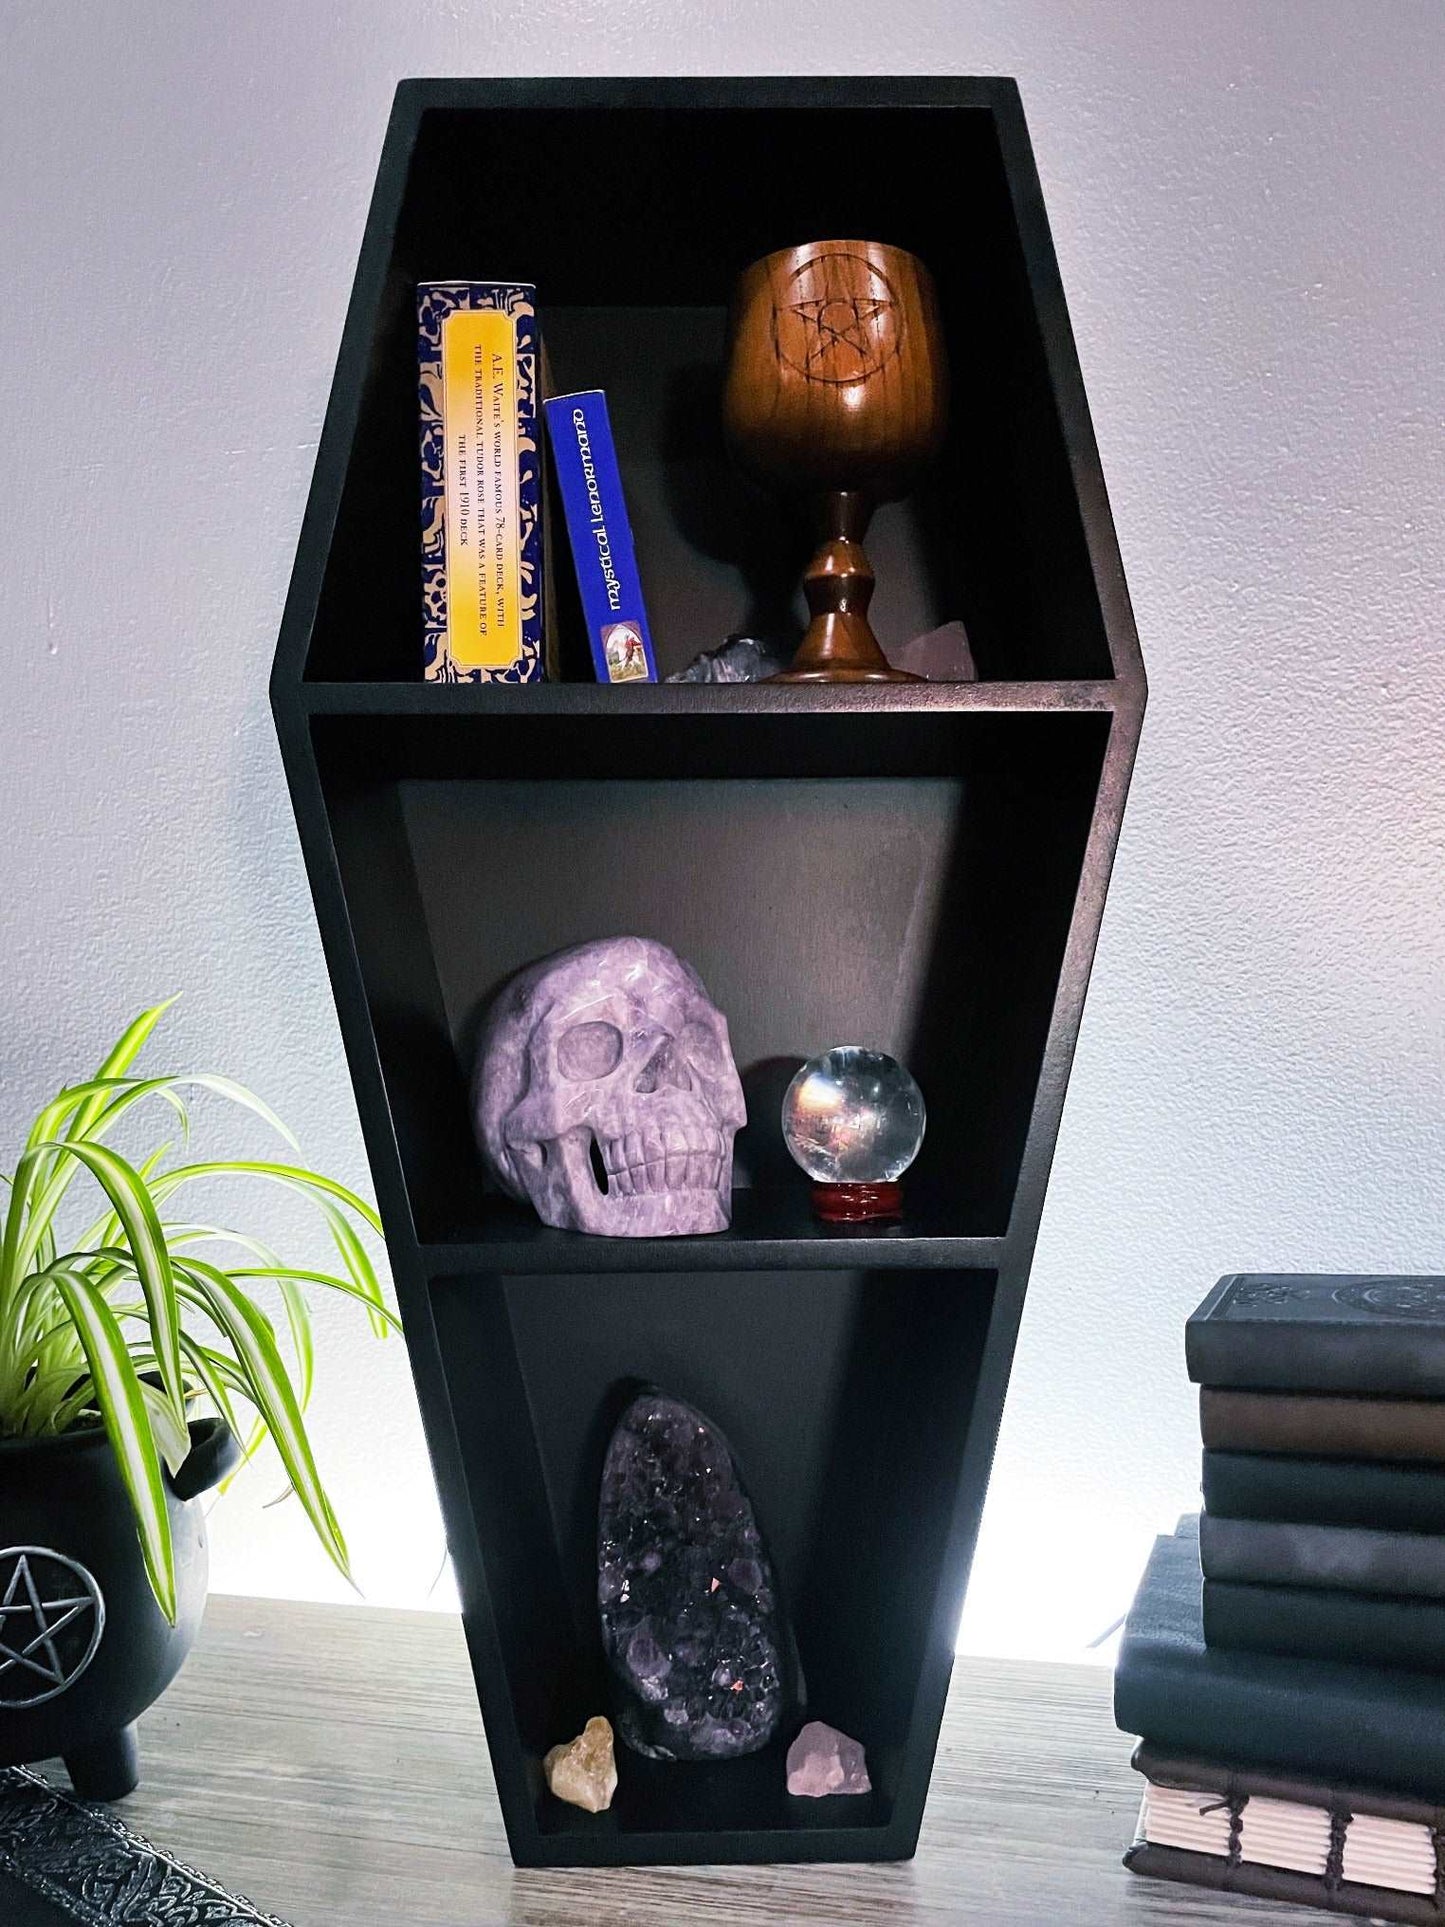 Pictured is a shelving unit shaped like a black coffin.